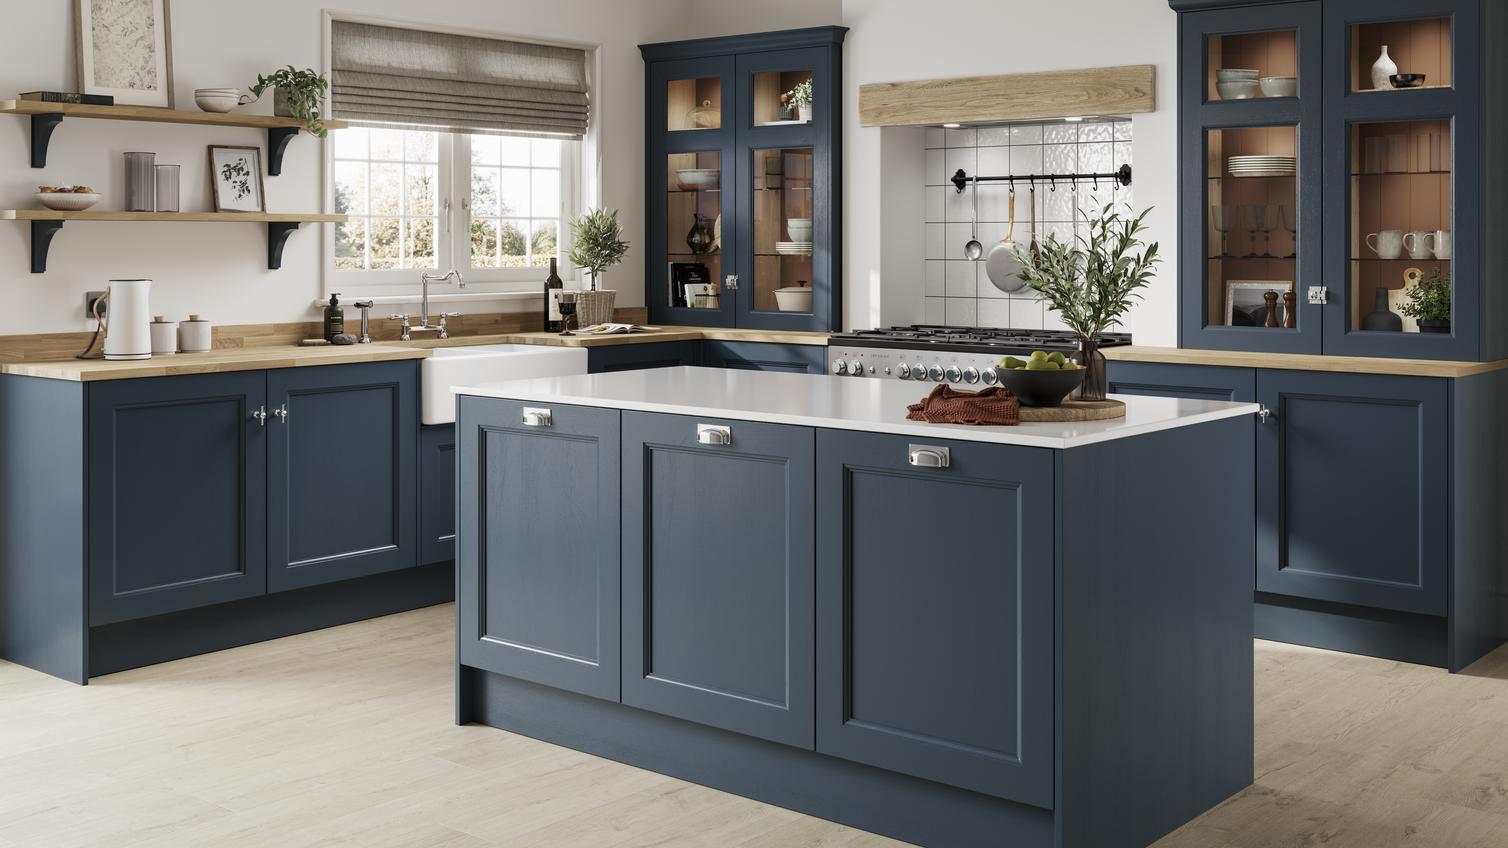 A dark, marine blue shaker kitchen in an L-shaped layout with wood-style worktops. The matching island has white worktops